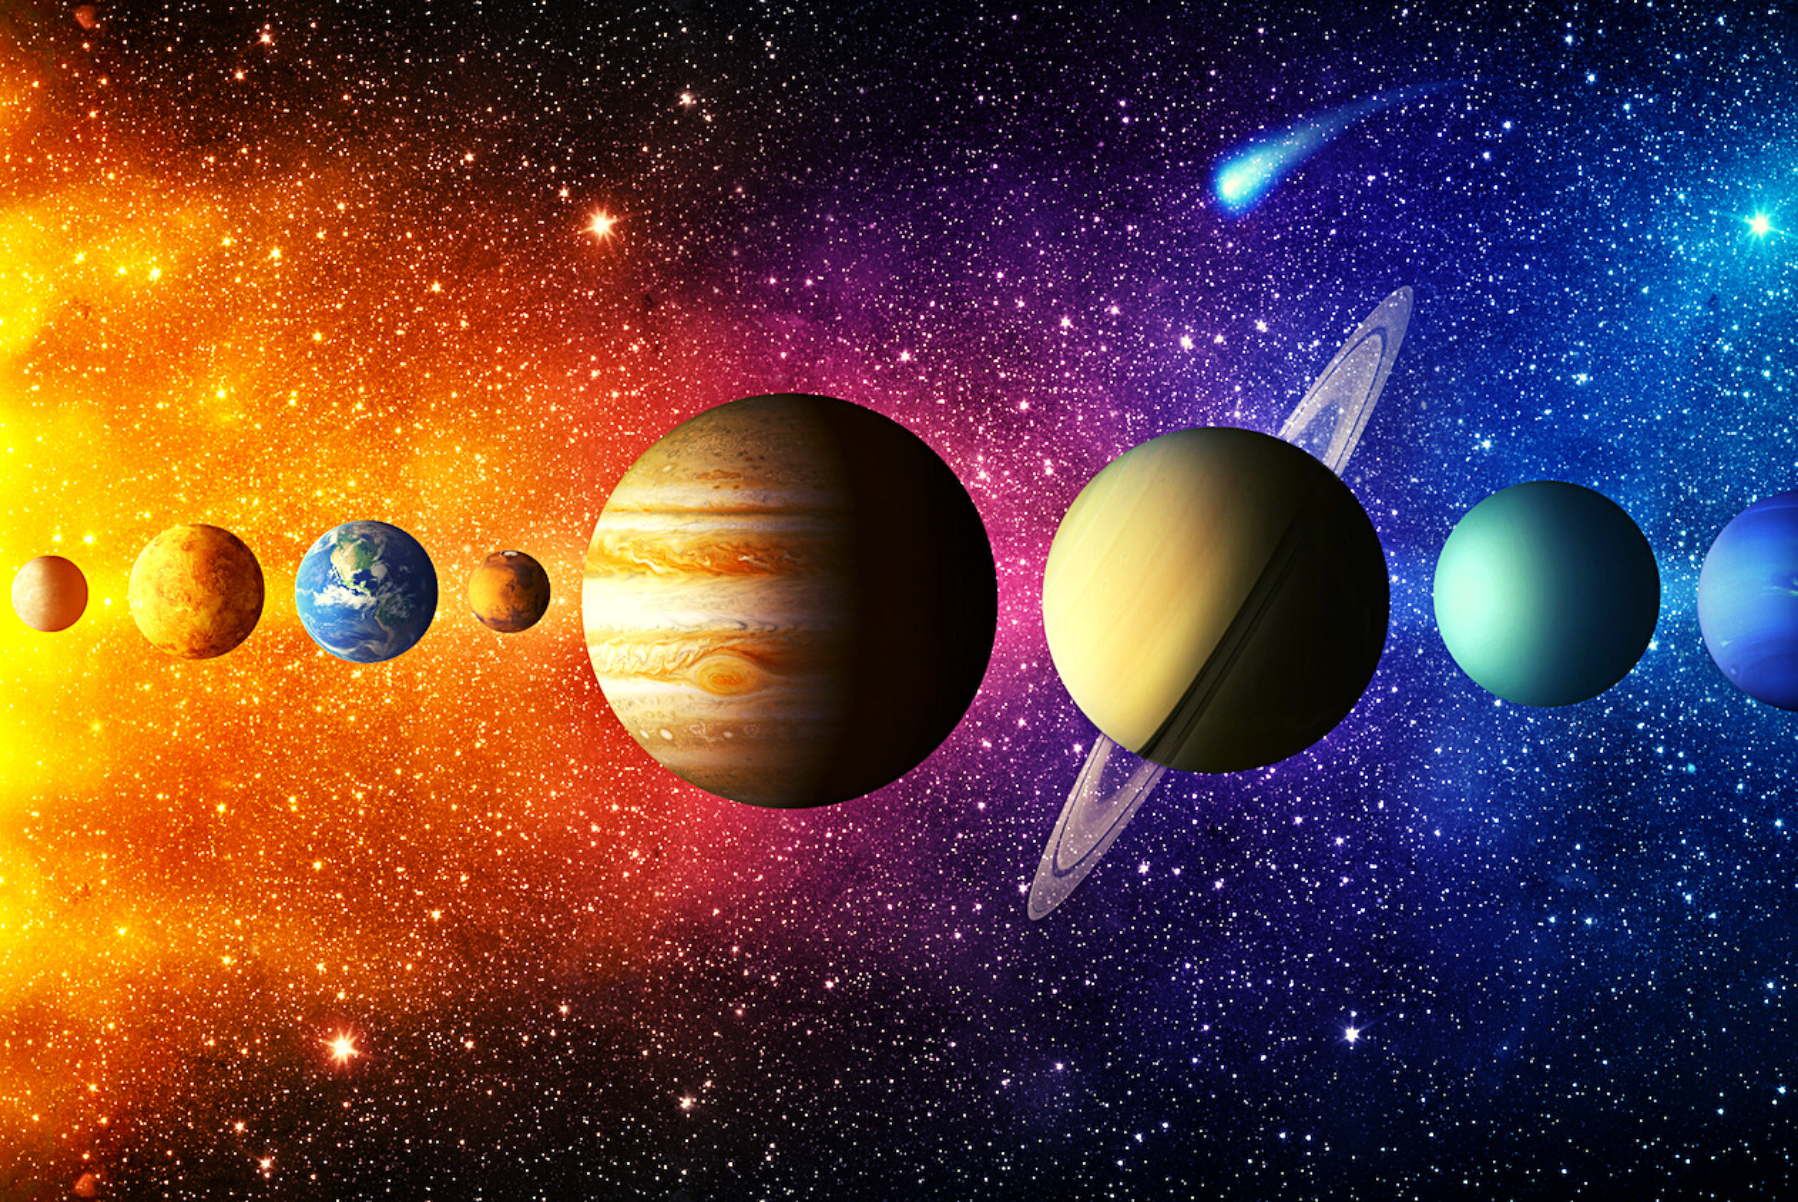 Astrology Explained: The Planets